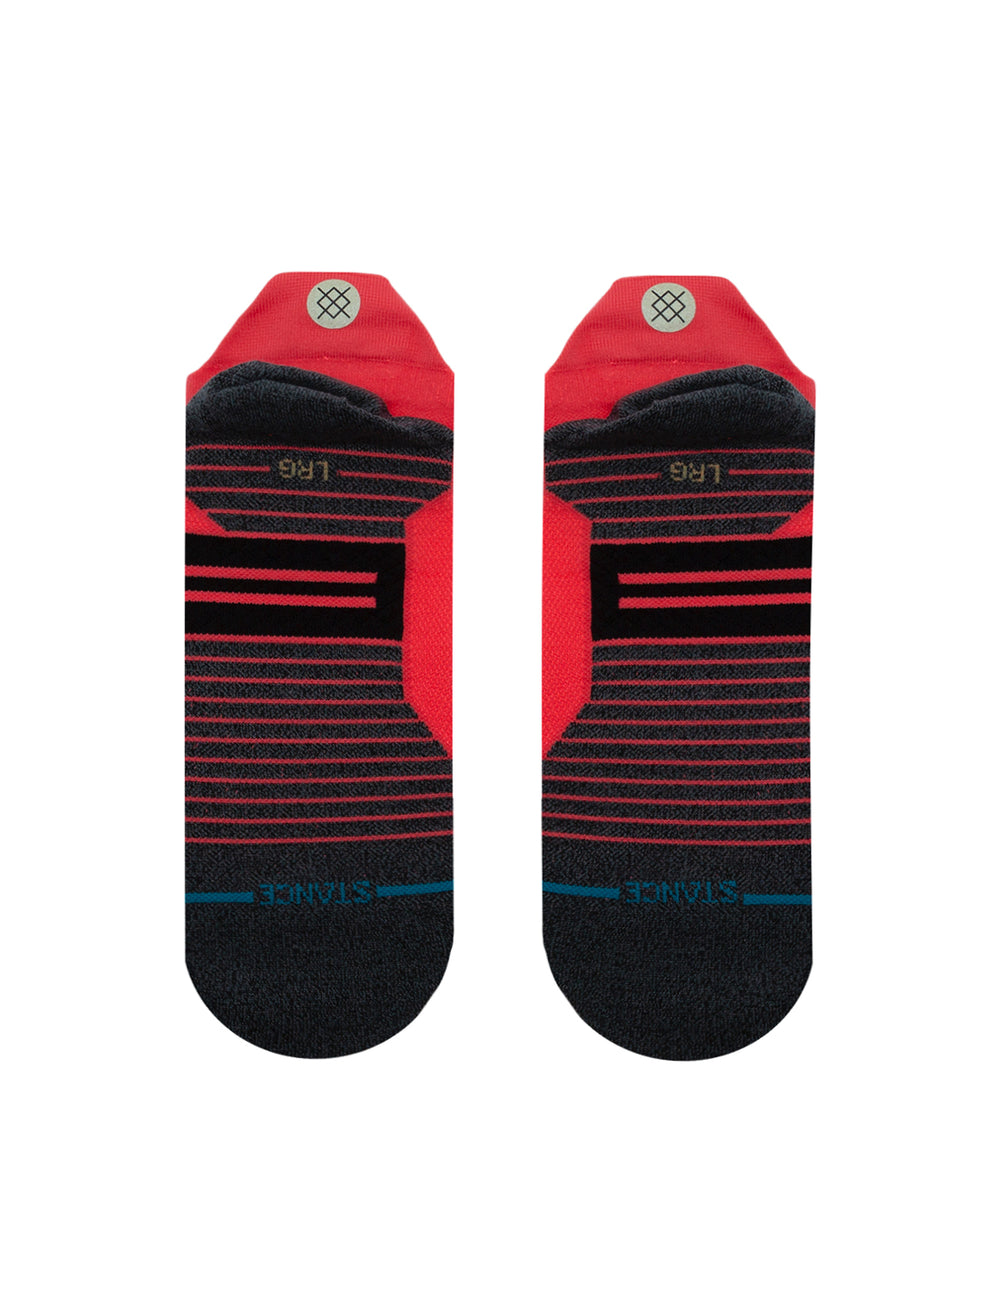 Back view of Stance's ultra tab running socks in neon pink.